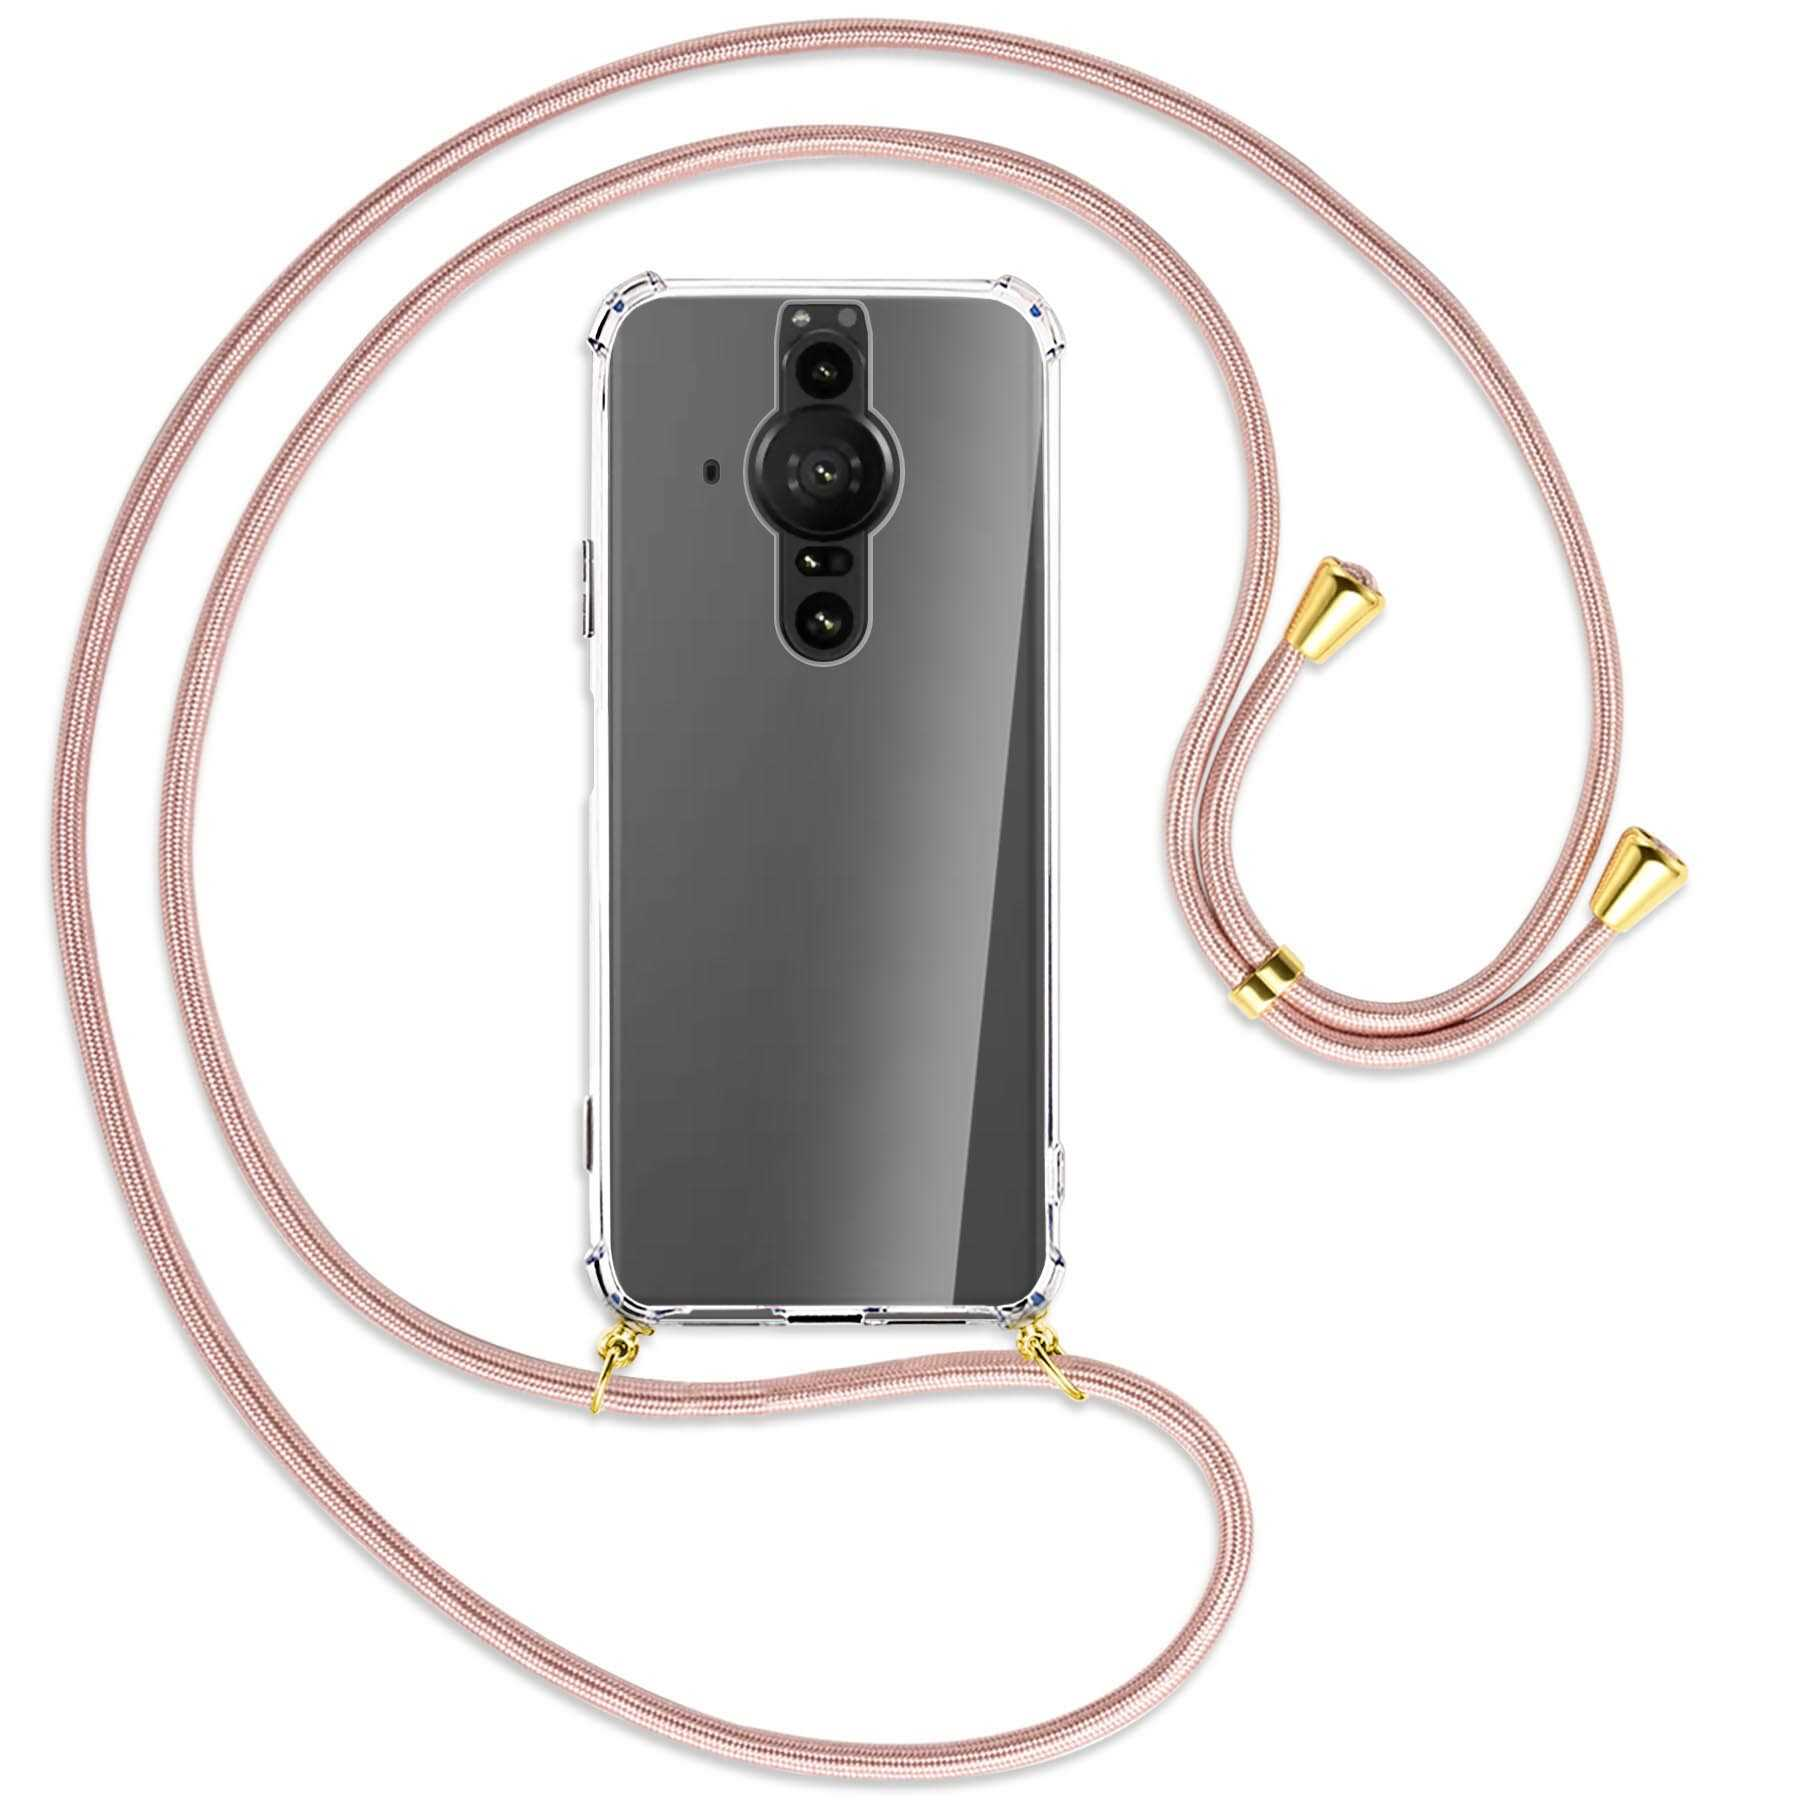 / mit Gold Backcover, Rosegold MORE PRO Umhänge-Hülle Kordel, ENERGY MTB Xperia 1, Sony,